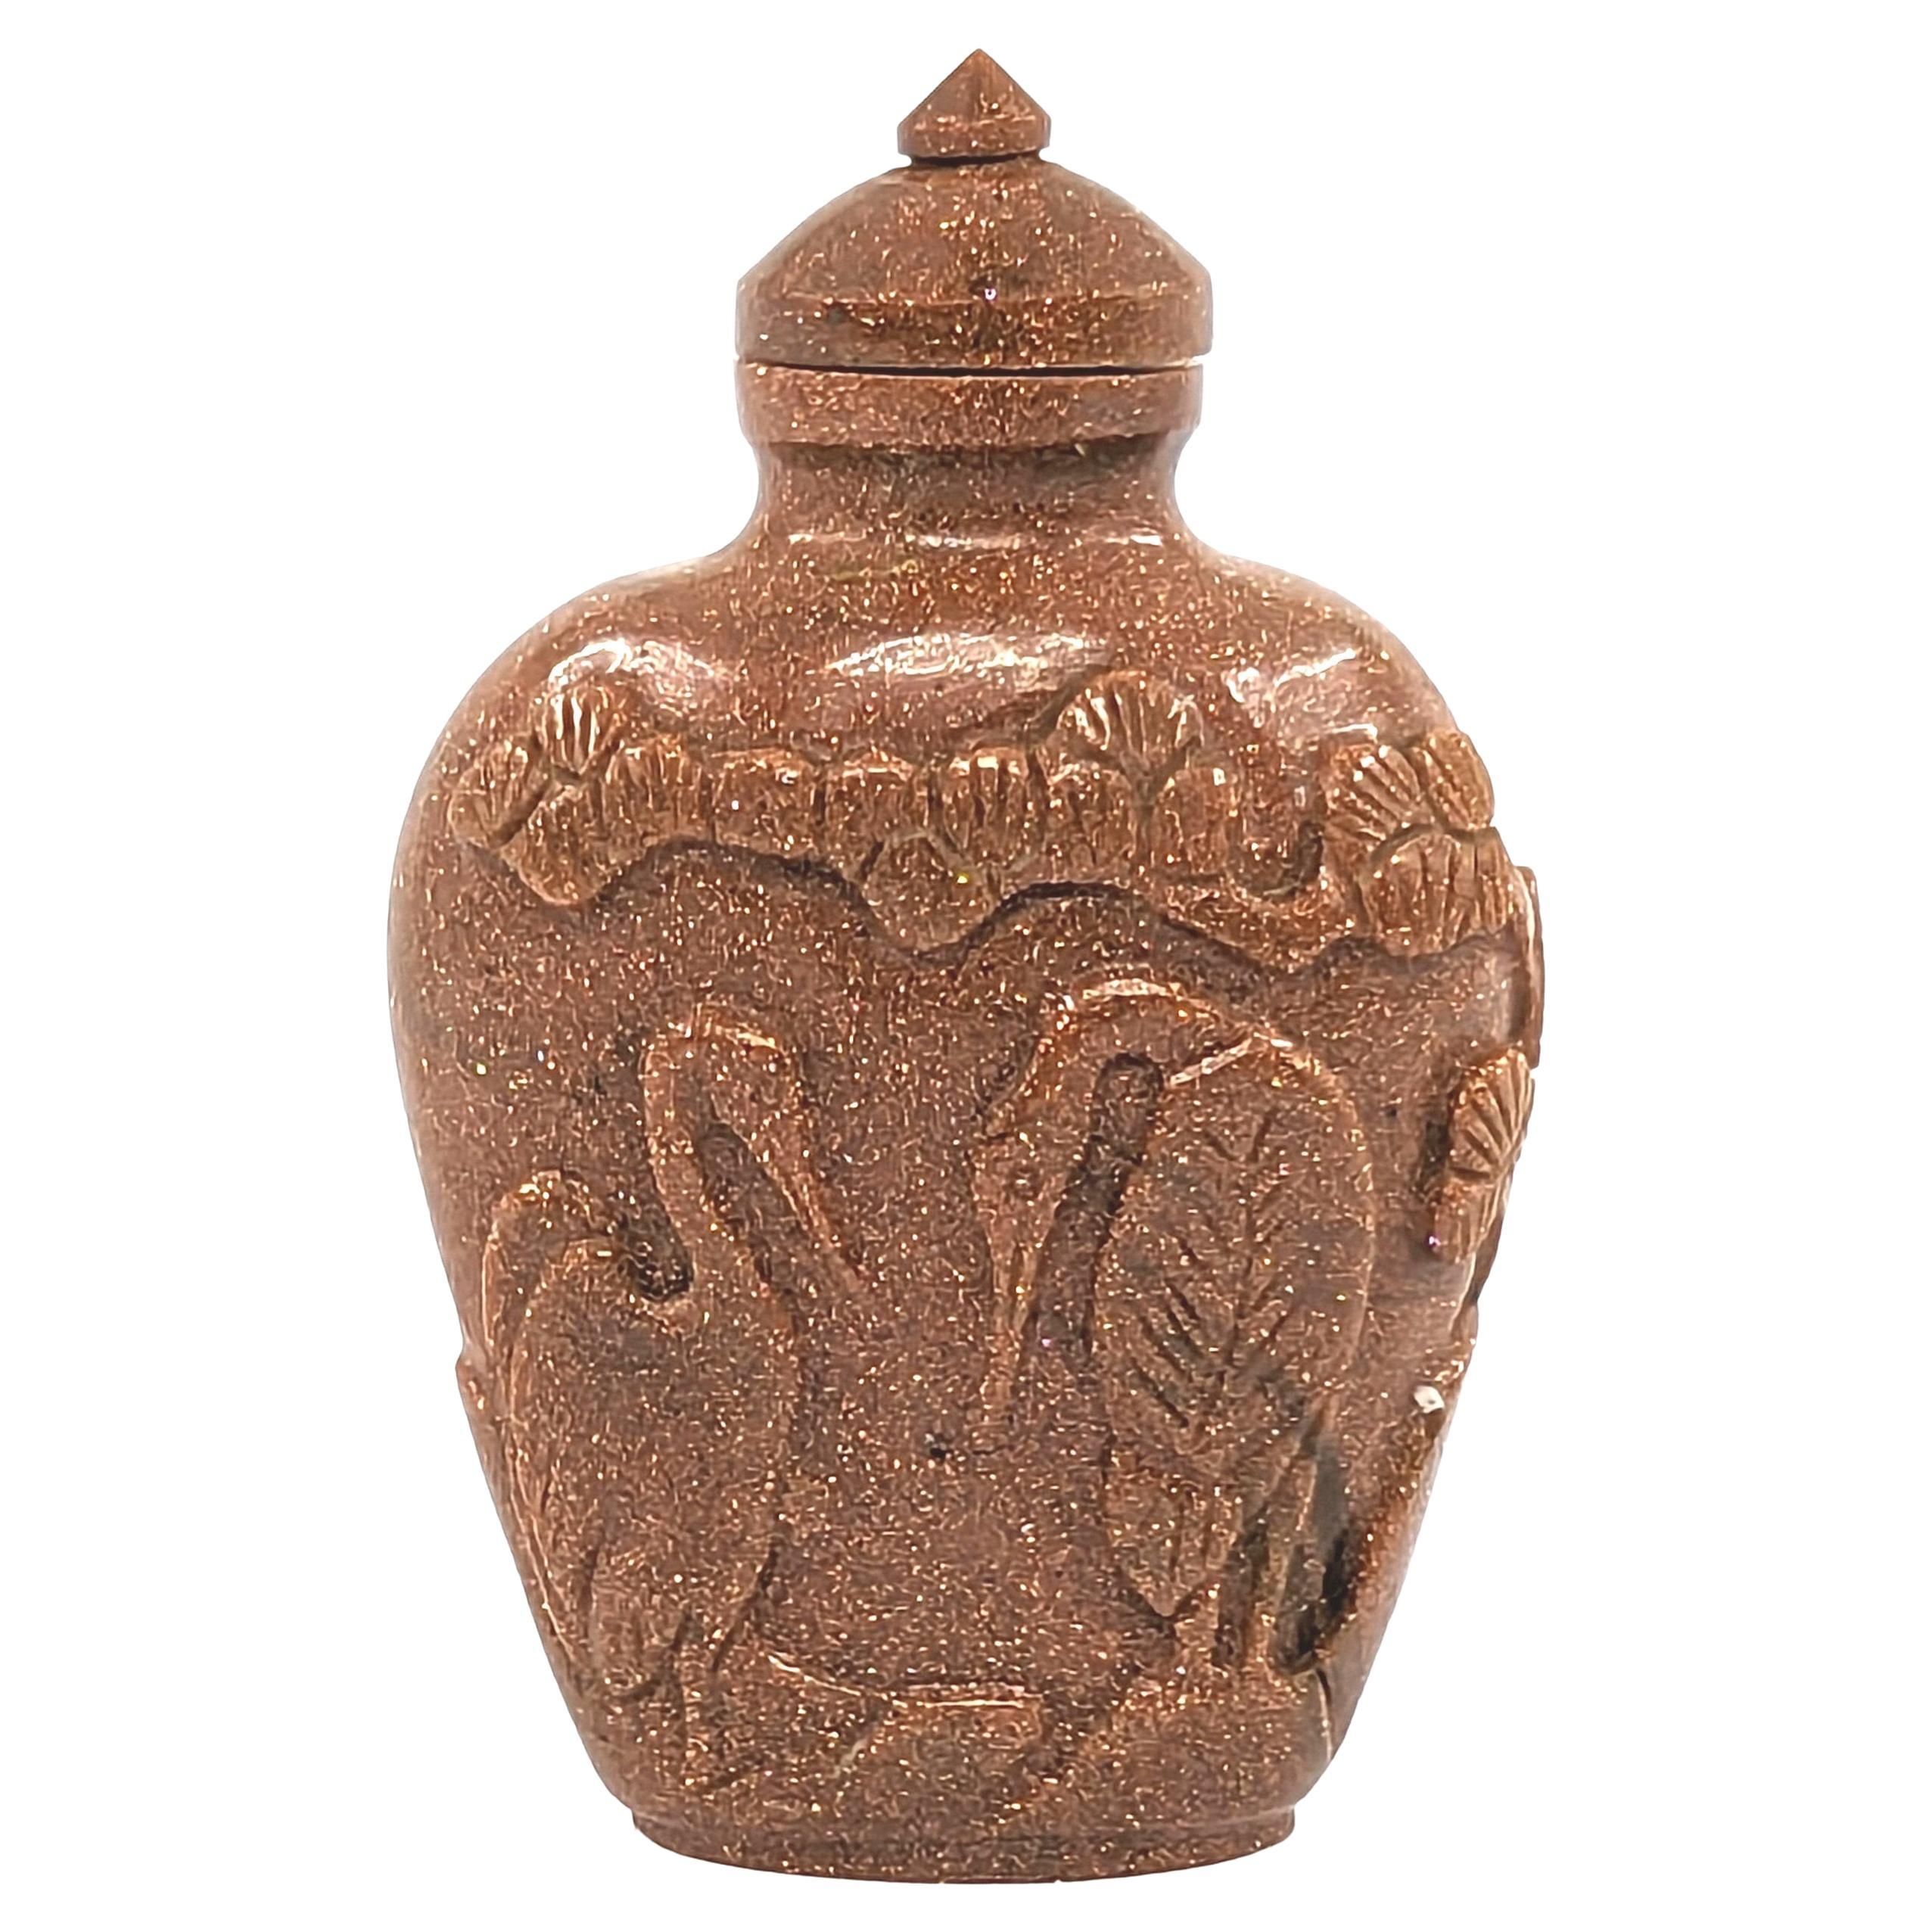 Discover this rare and exquisite shimmering goldstone snuff bottle from the Republic of China period (1910-1940), a representation of the era's refined craftsmanship. Made from the distinctive goldstone, the bottle captivates with its natural